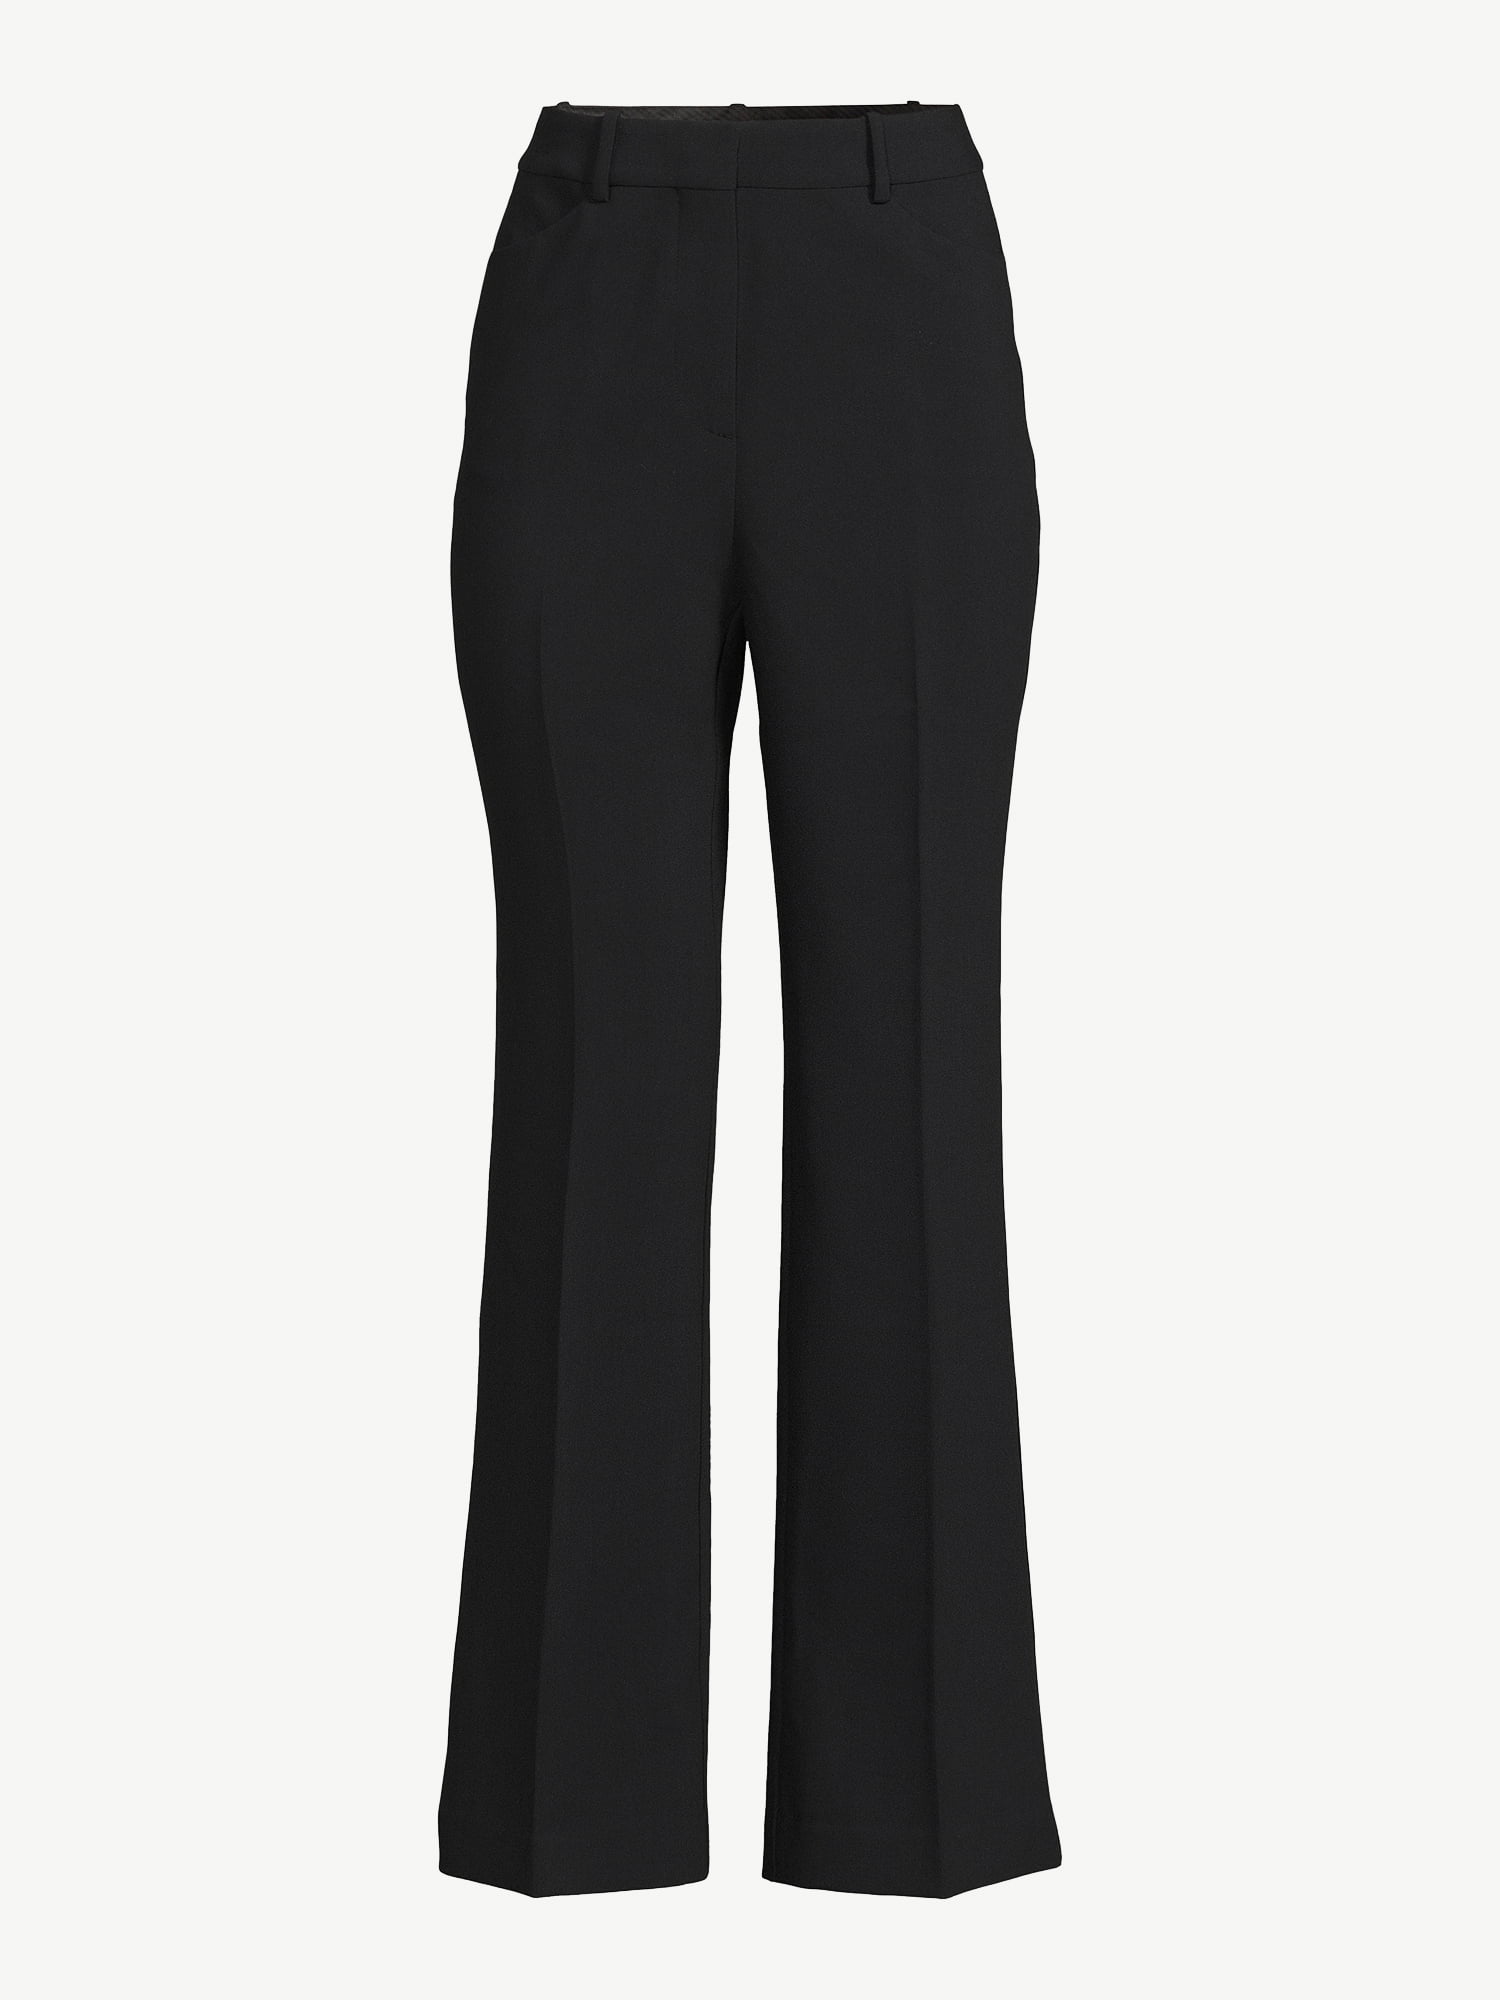 Derfor fiktion ligning Scoop Women's High Waisted Crease Front Trousers, Sizes XS-XXL - Walmart.com